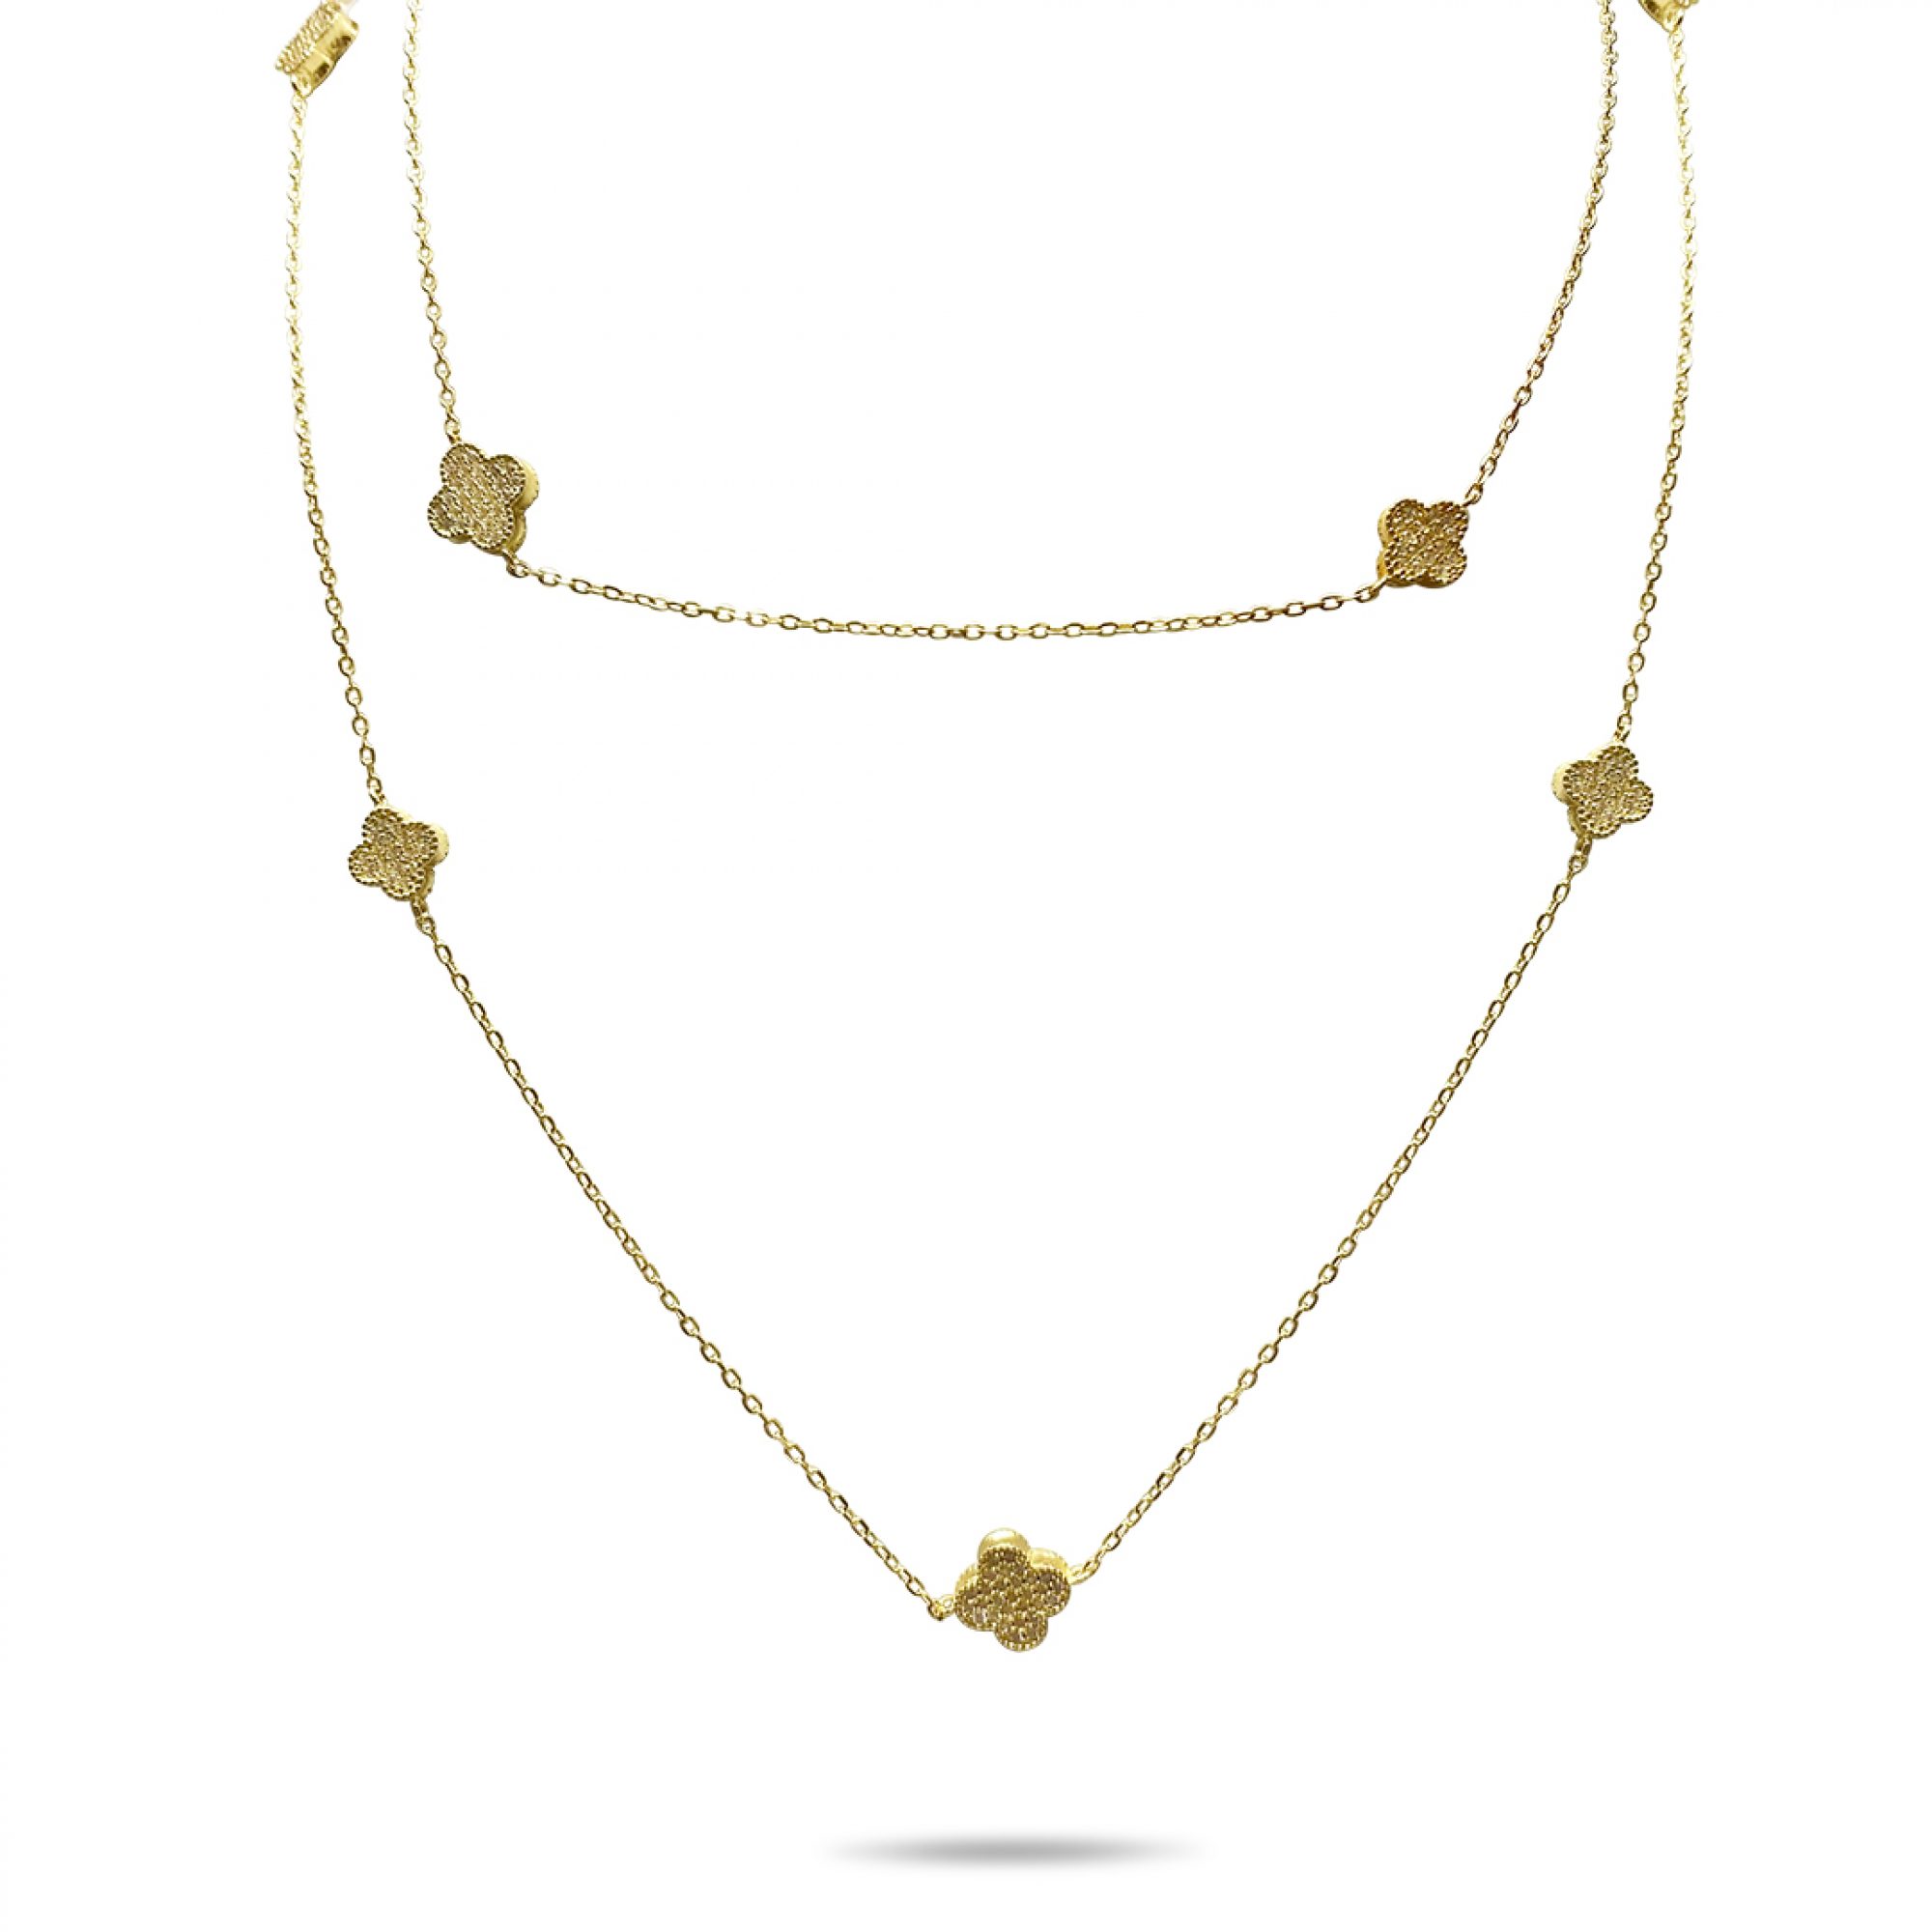 Gold plated double necklace with zircon stones